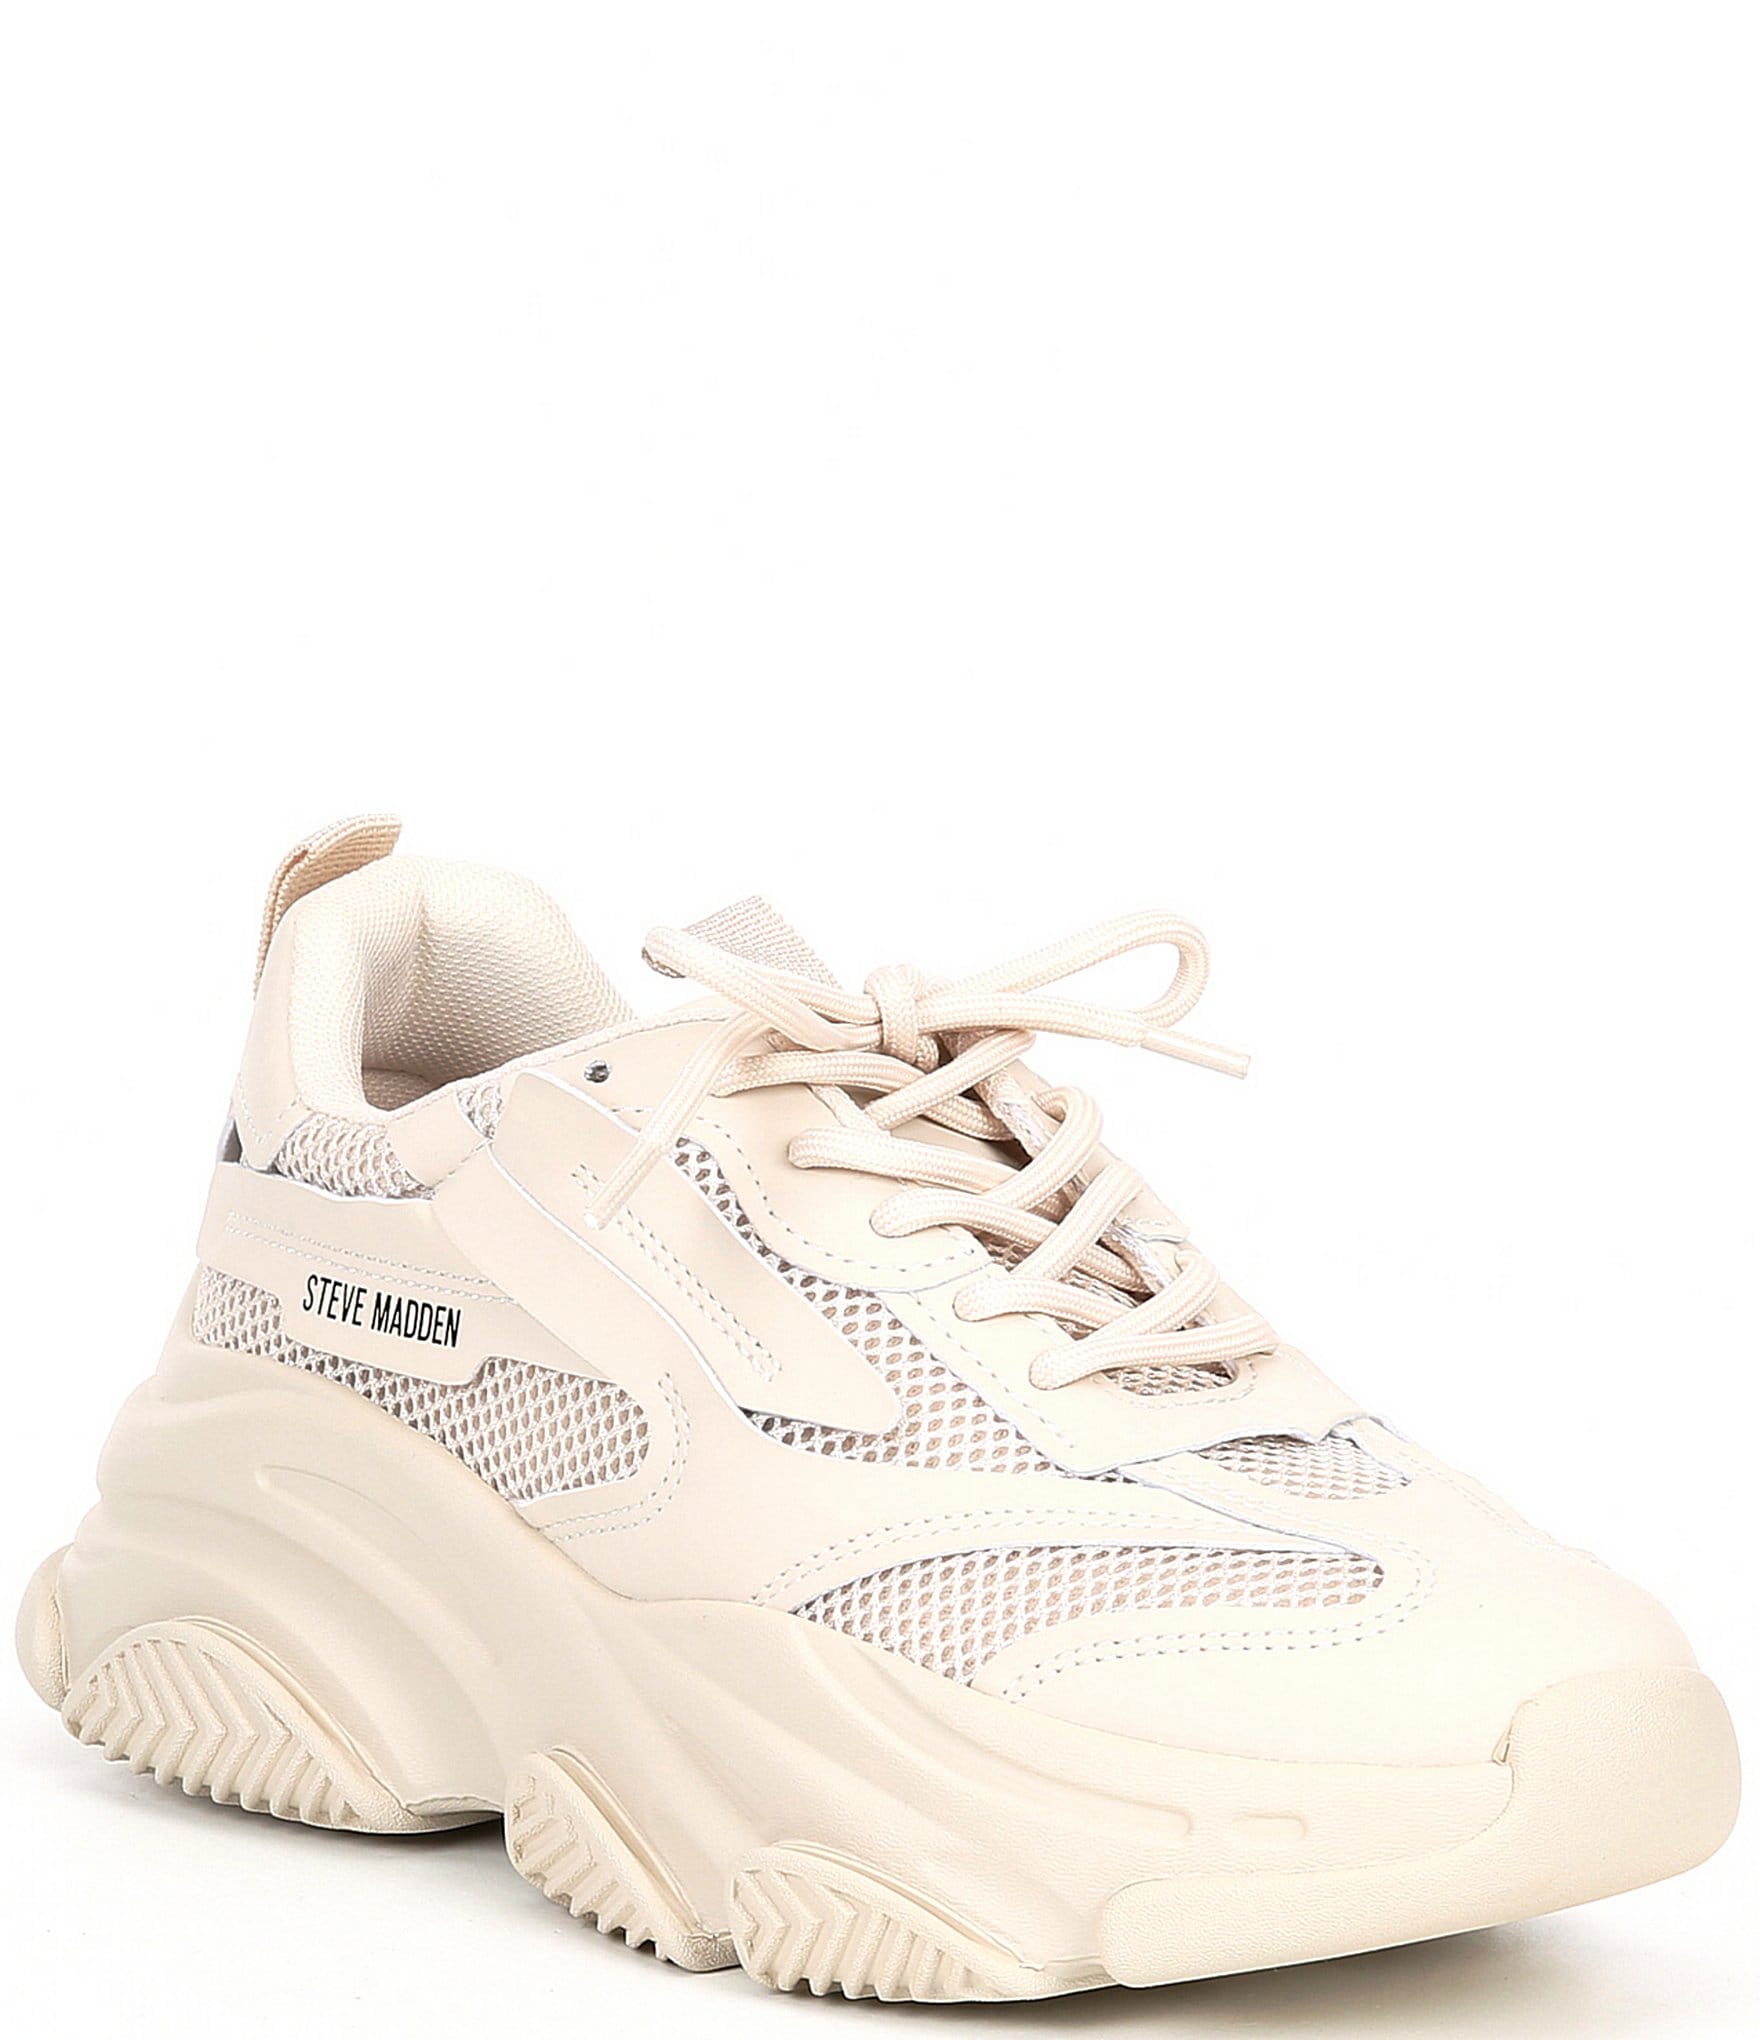 Steve Madden Possession Sneakers In Beige Leather